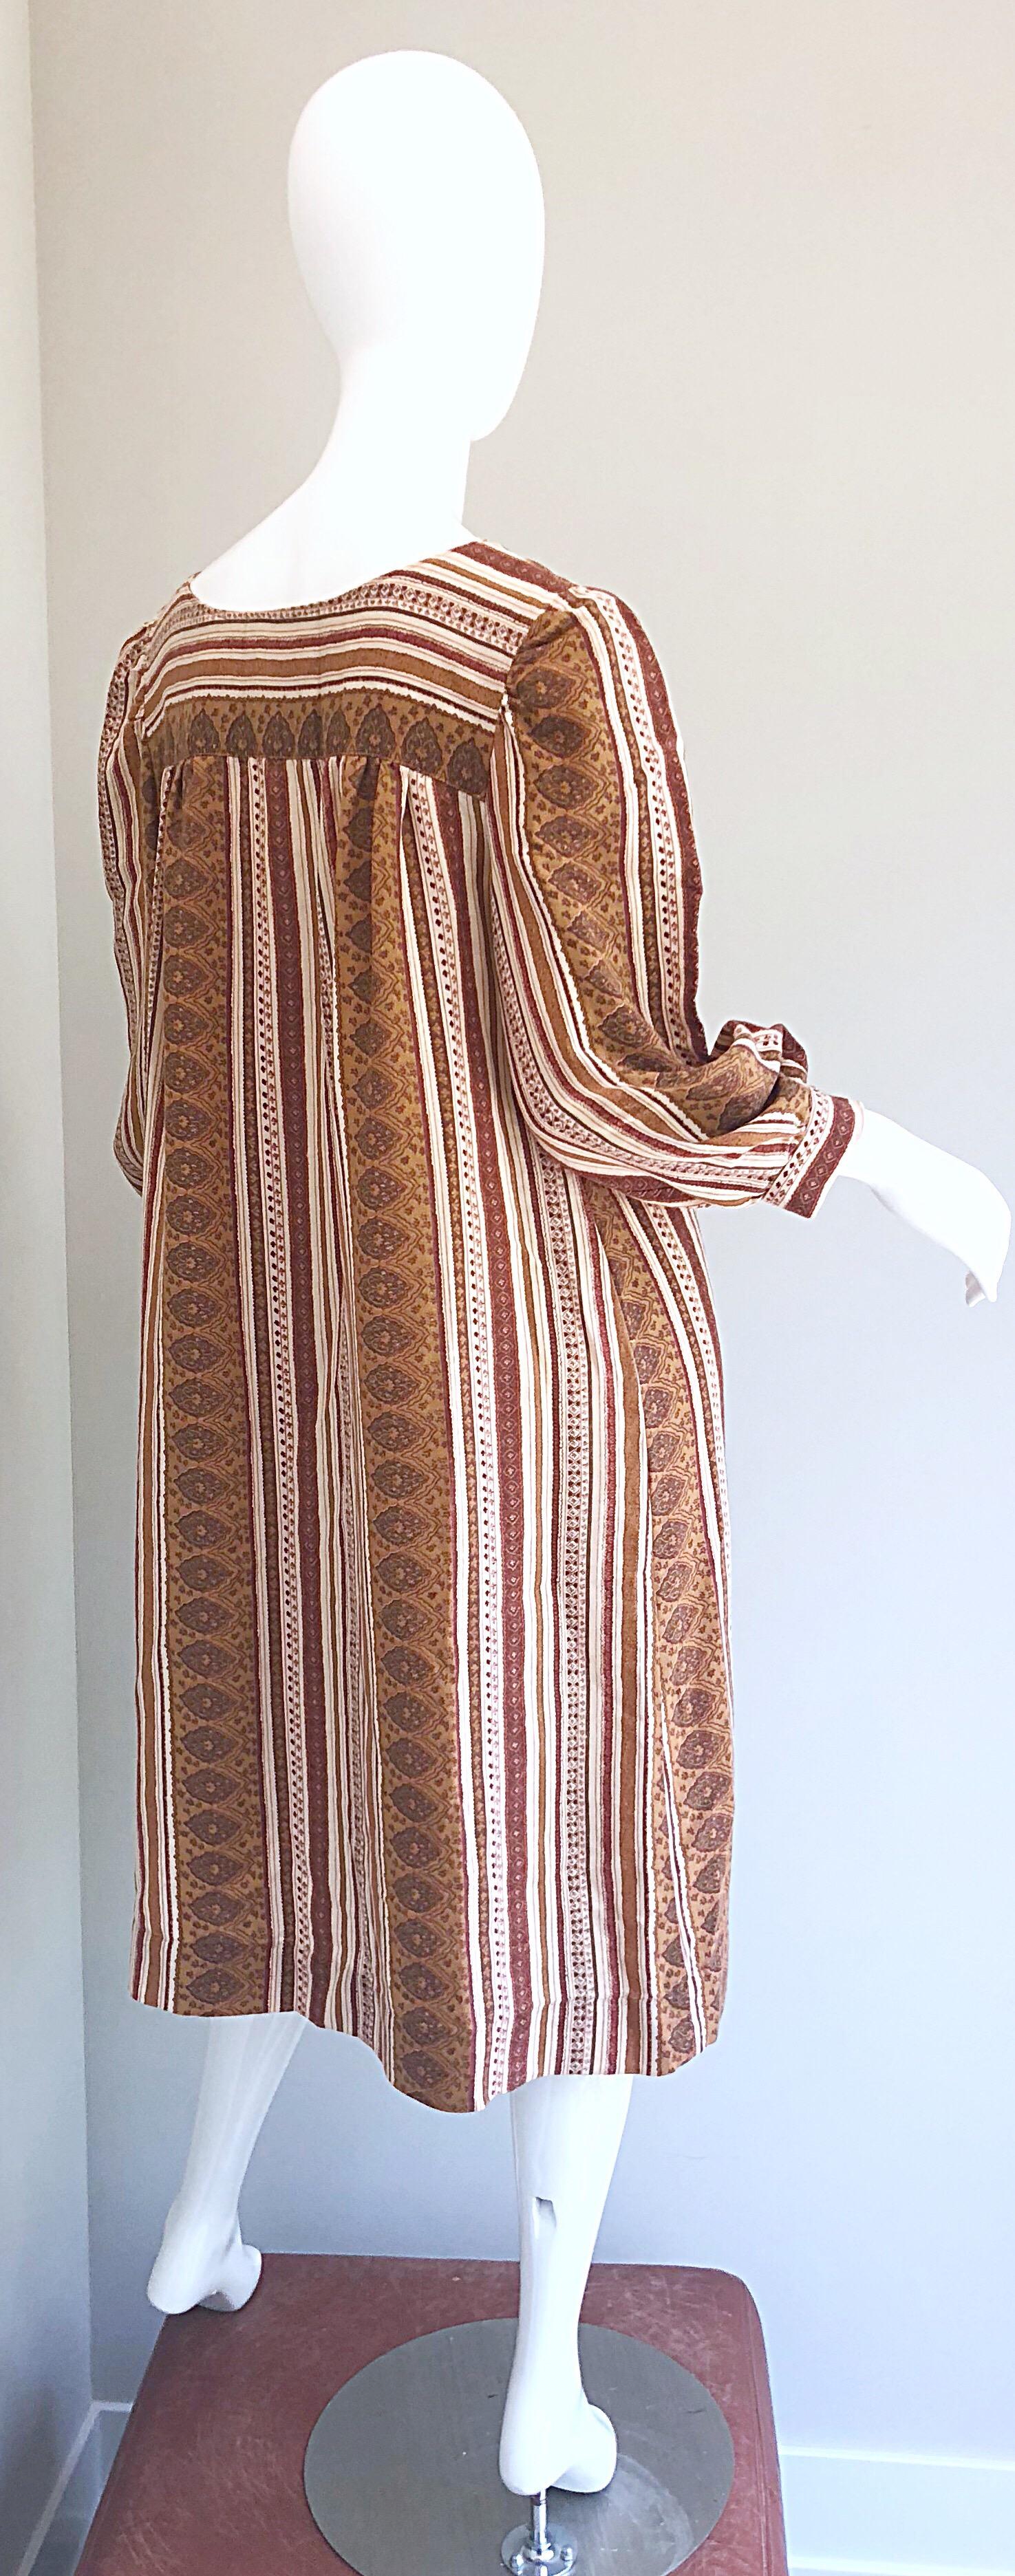 Women's 1970s Boho Chic Brown and Ivory Soft Cotton Paisley Print Vintage 70s Dress